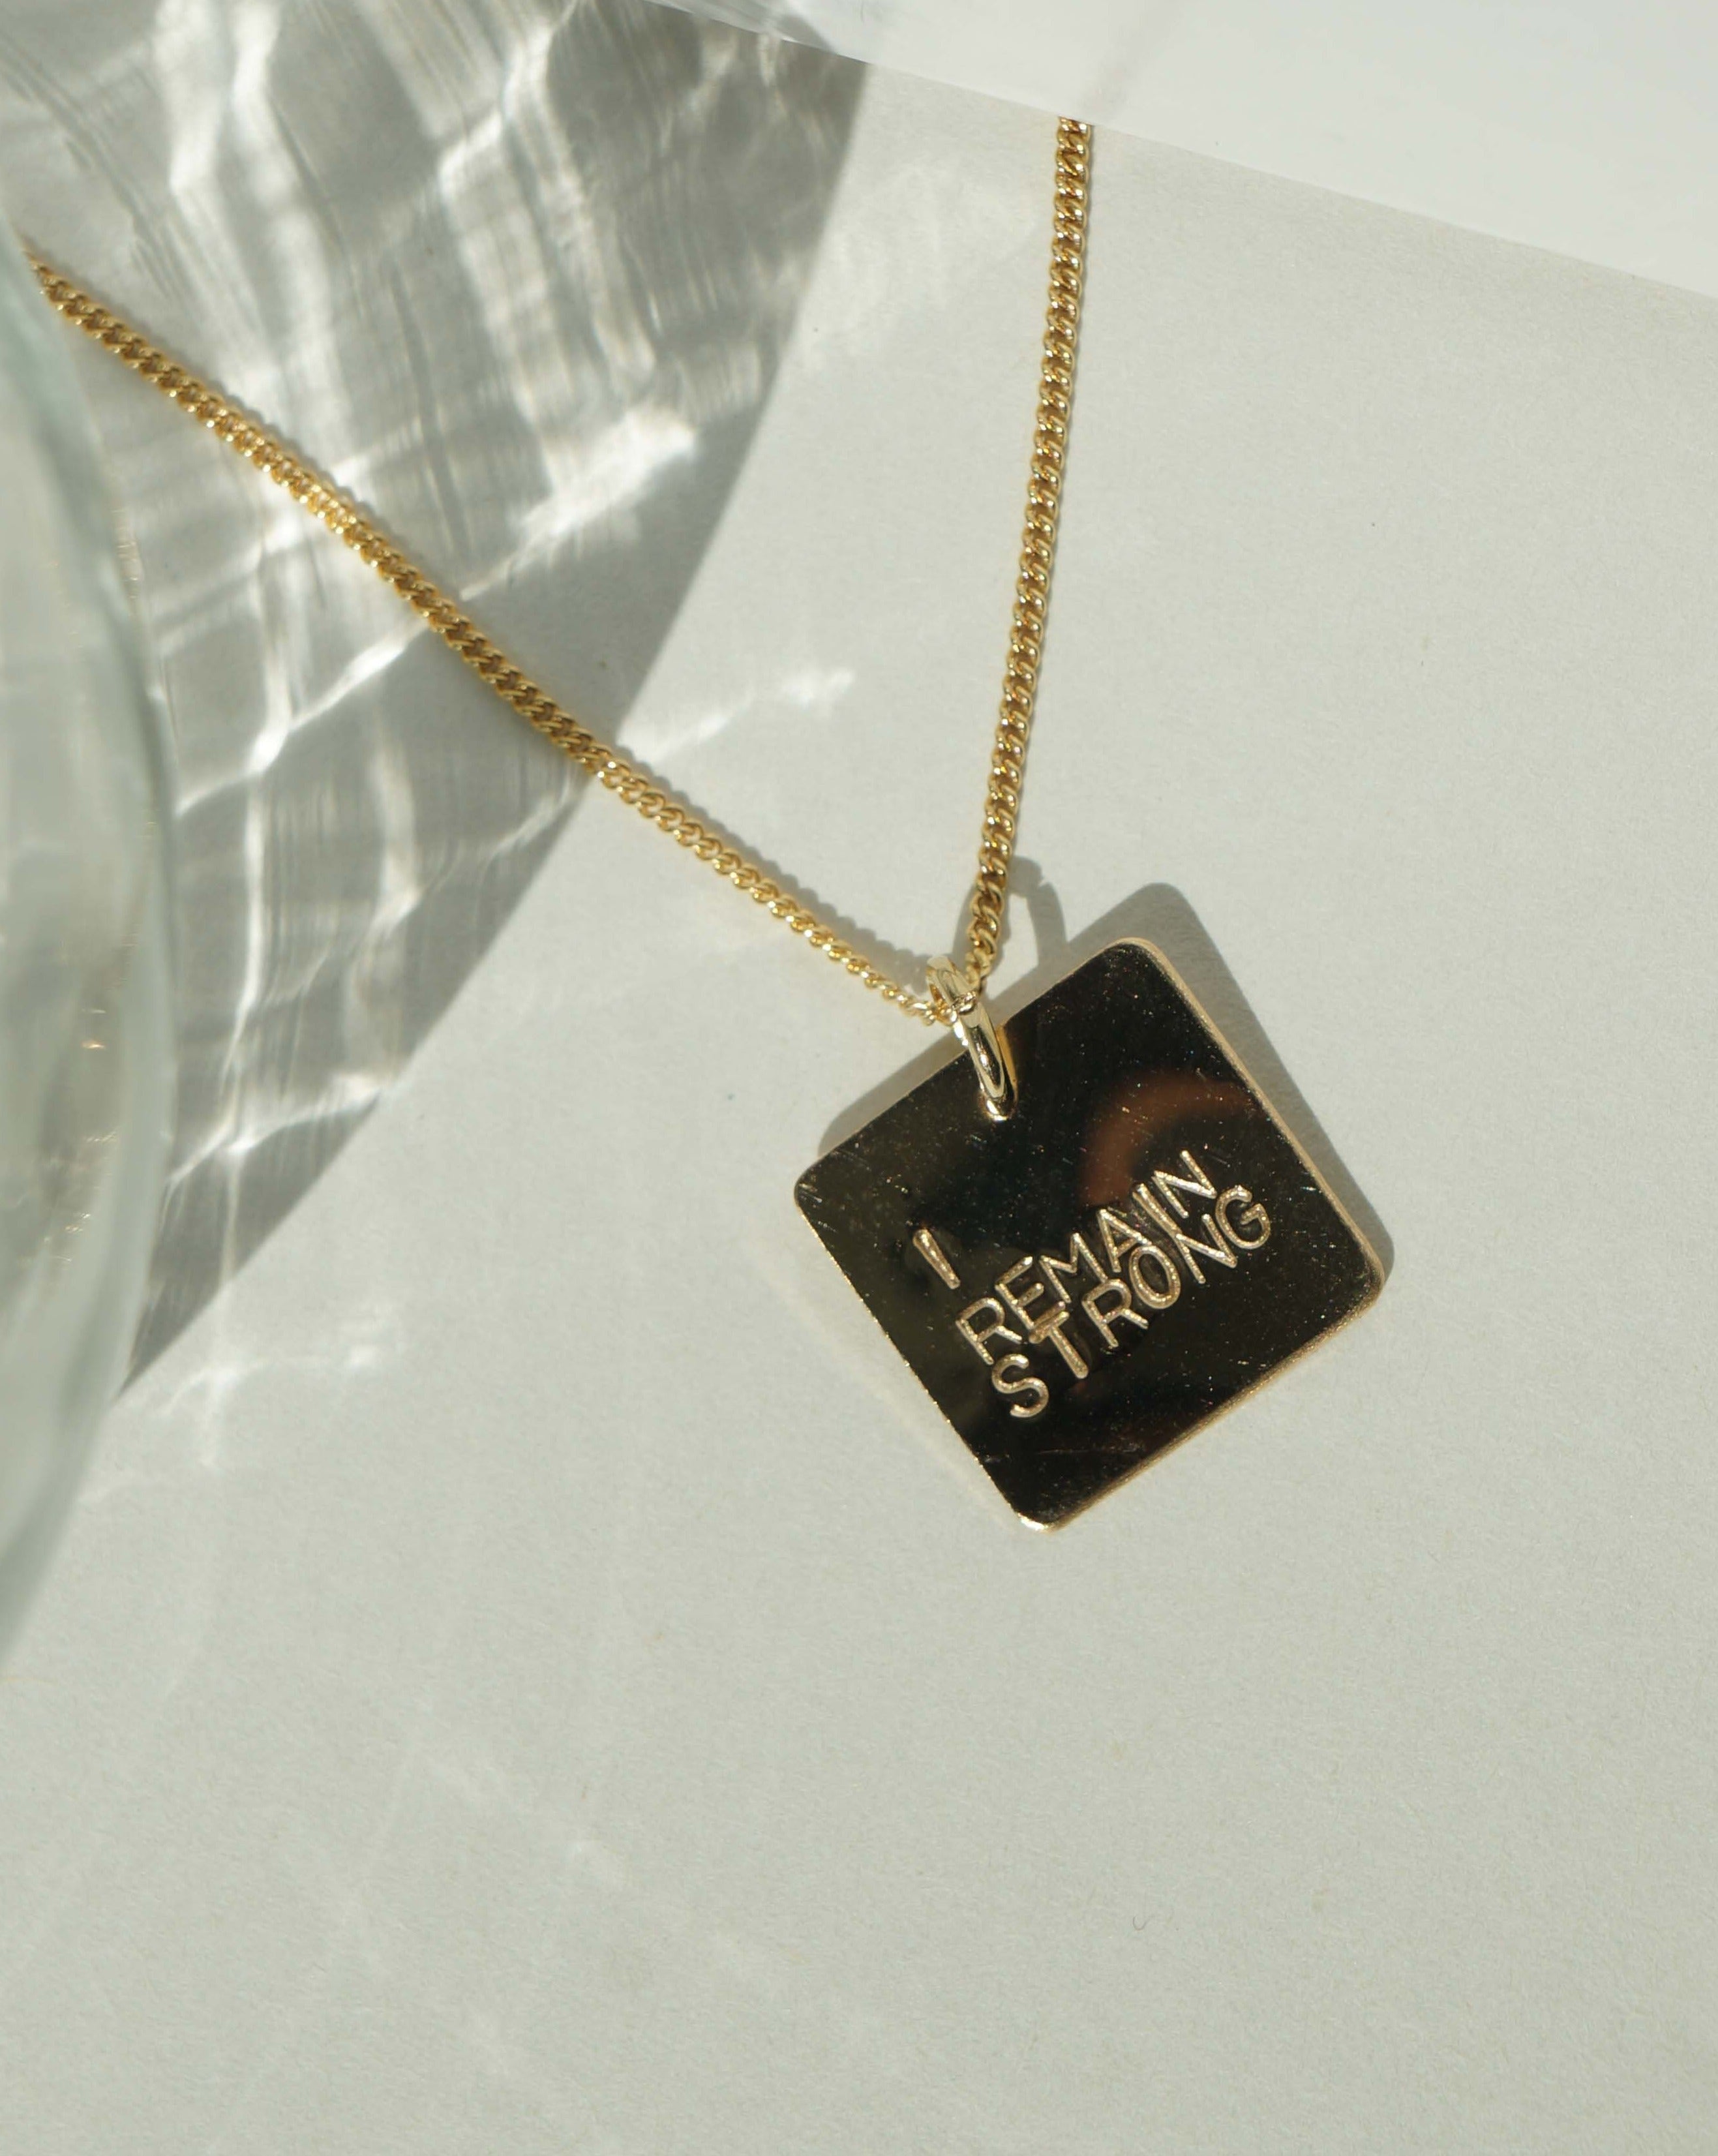 Zola Necklace by KOZAKH. A 16 to 18 inch adjustable length necklace, crafted in 14K Gold Filled, featuring a flat square pendant with engraved customizable quote.